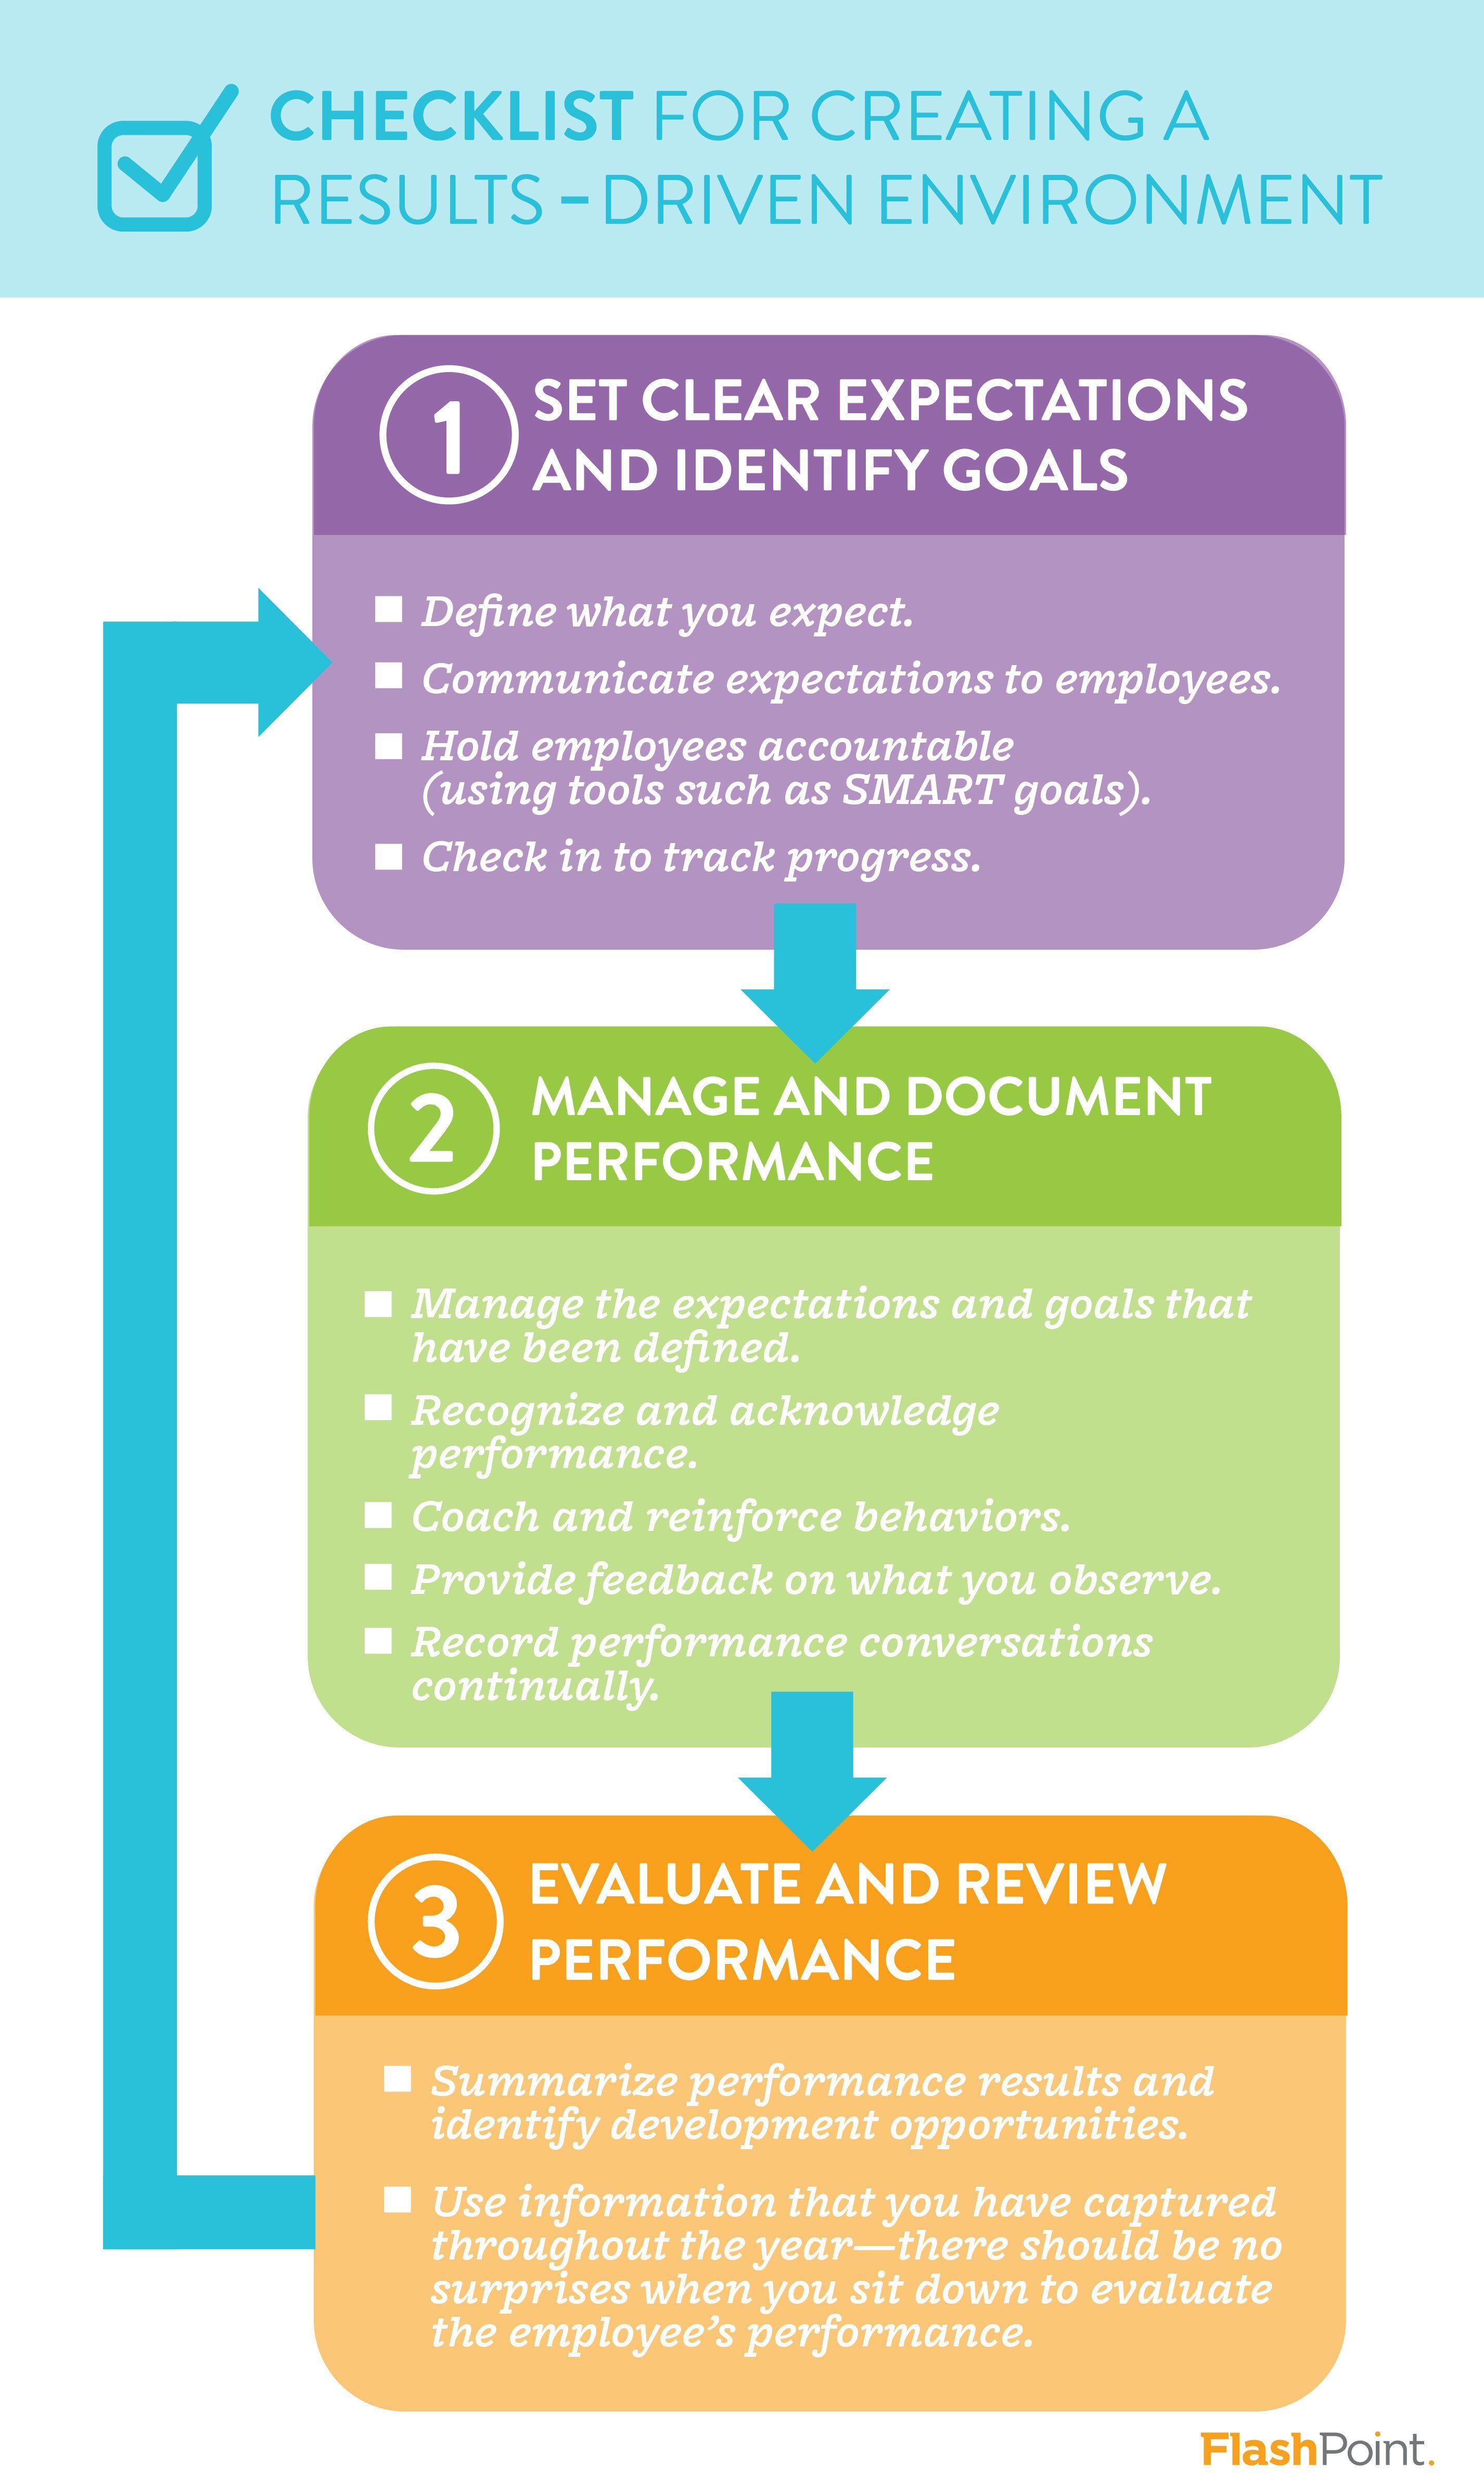 Performance Feedback in a Constant Cycle of Management